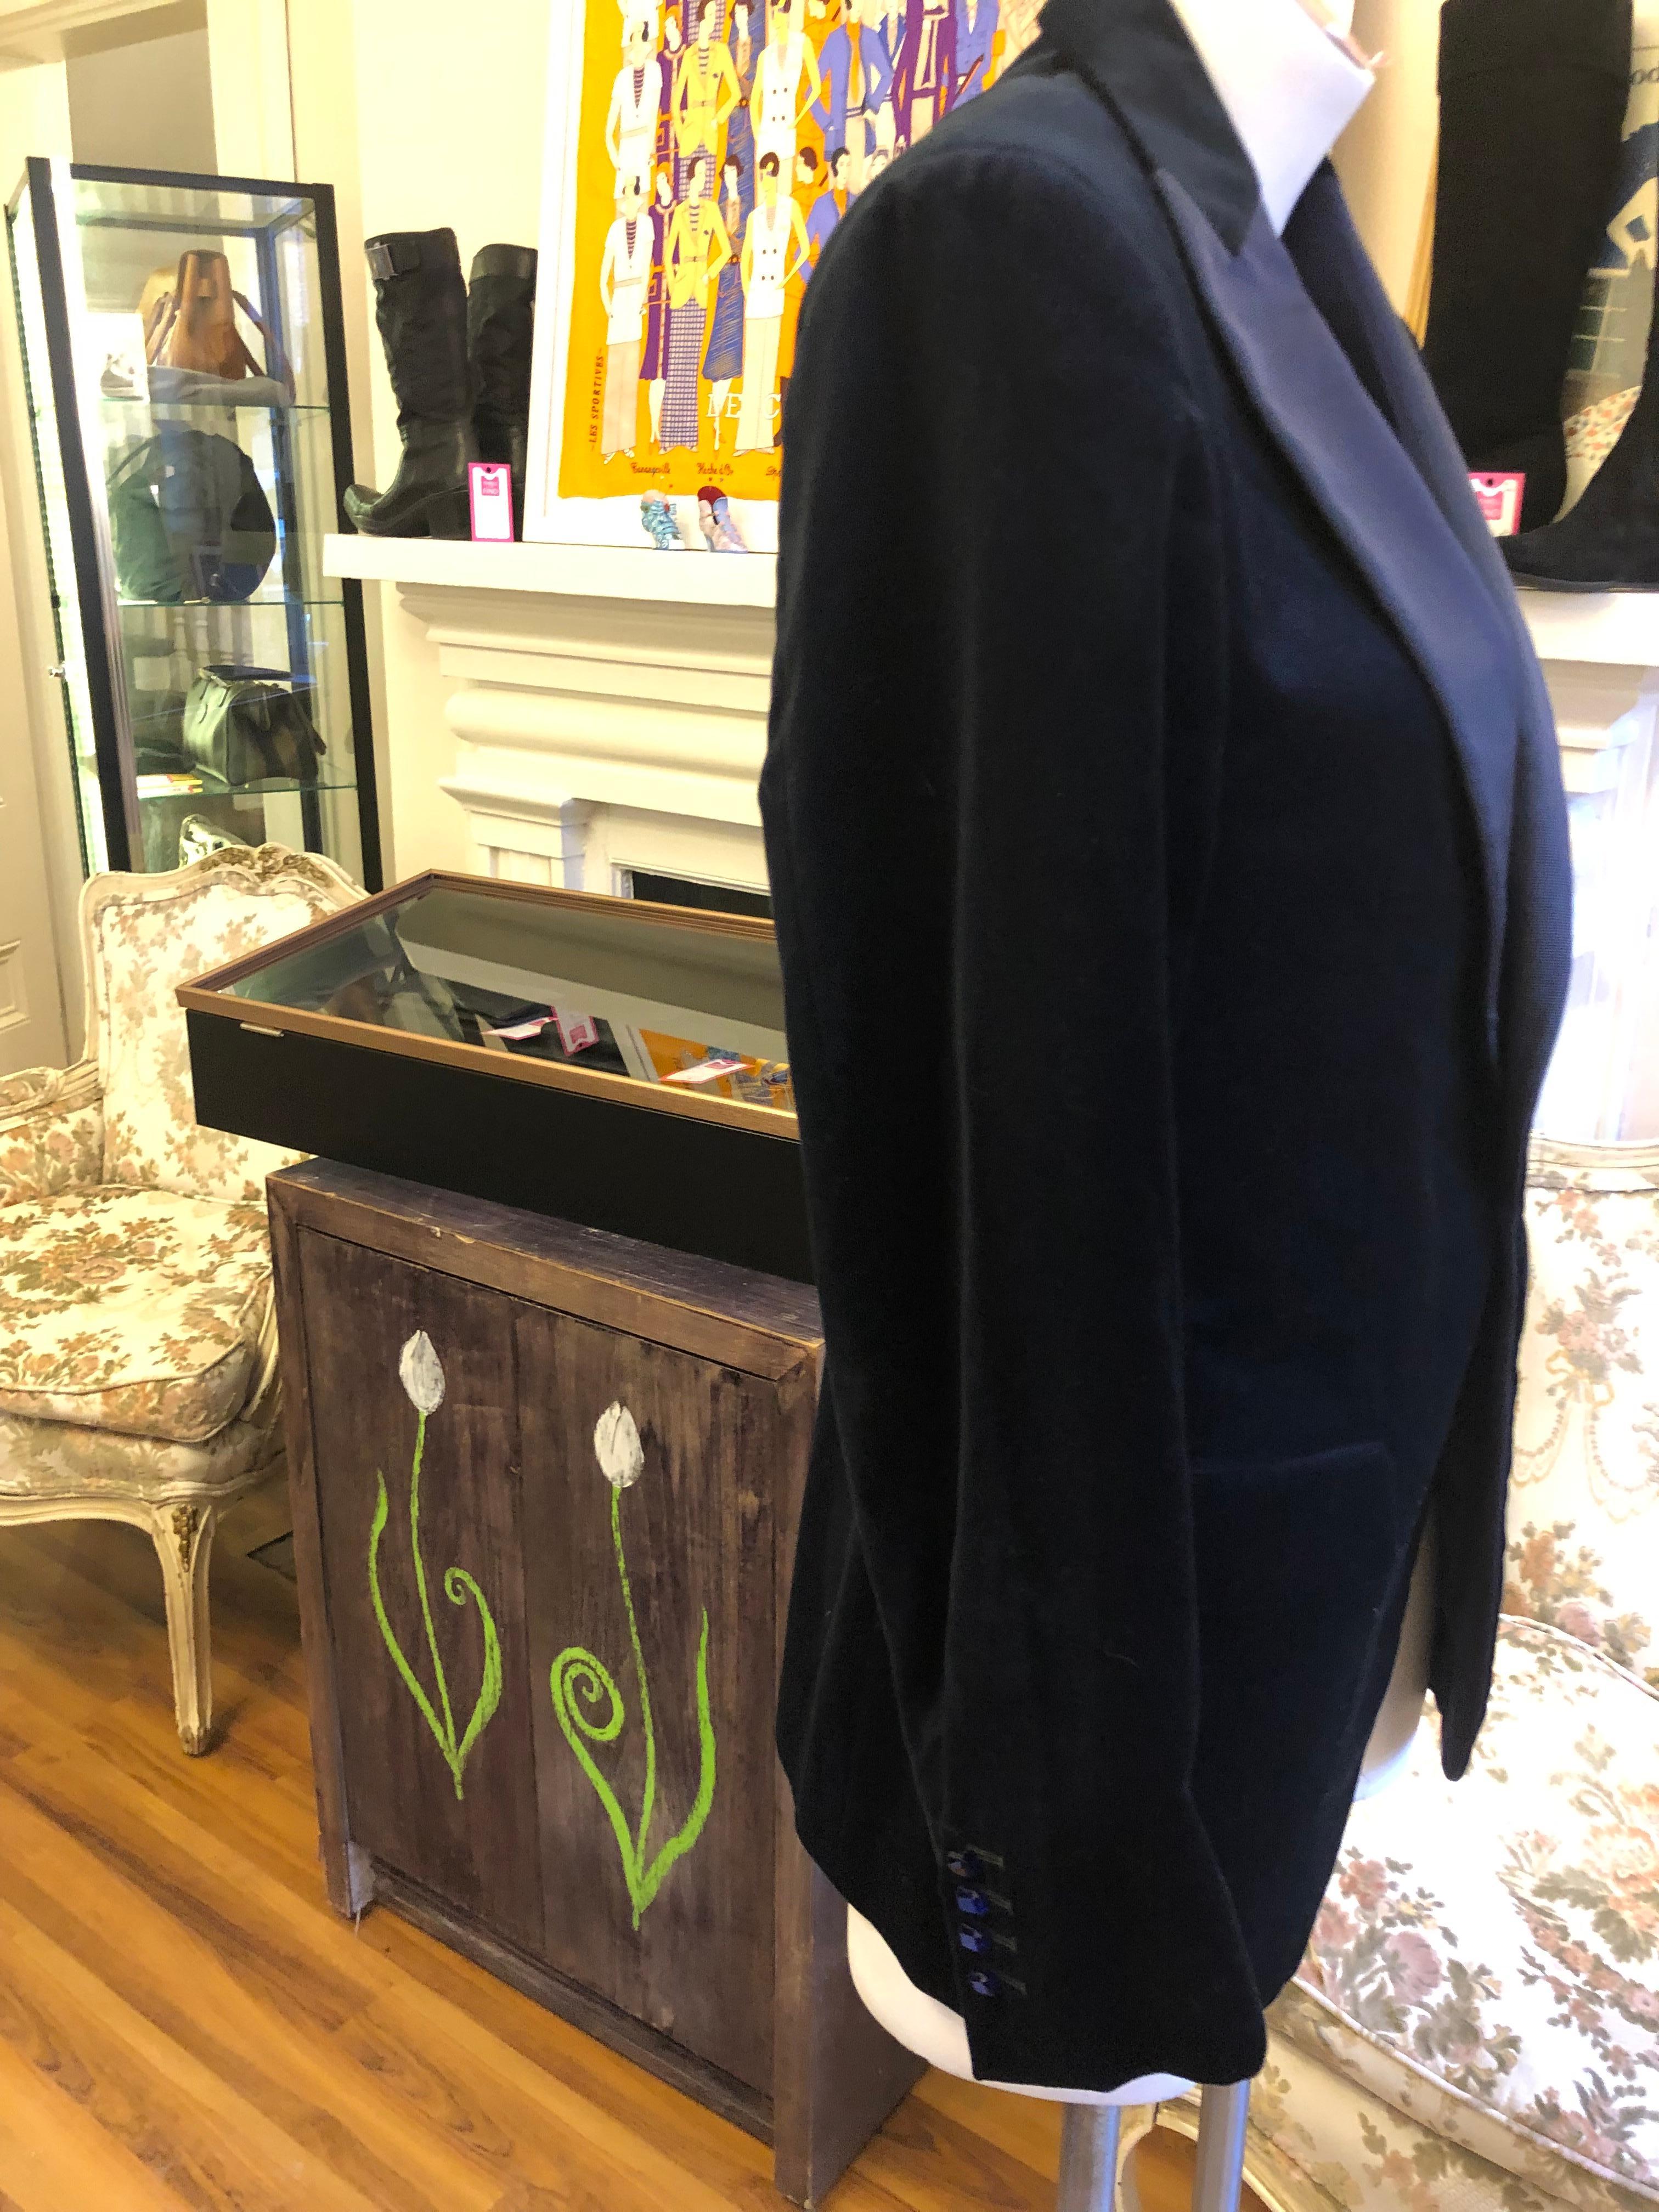 Superb textured cotton velvet tuxedo jacket with gros grain/satin lapels; silk signed paisley lining; two flap pockets and a breast pocket at the front; lining pockets; one button closure; center back vent, and EXQUISITE 